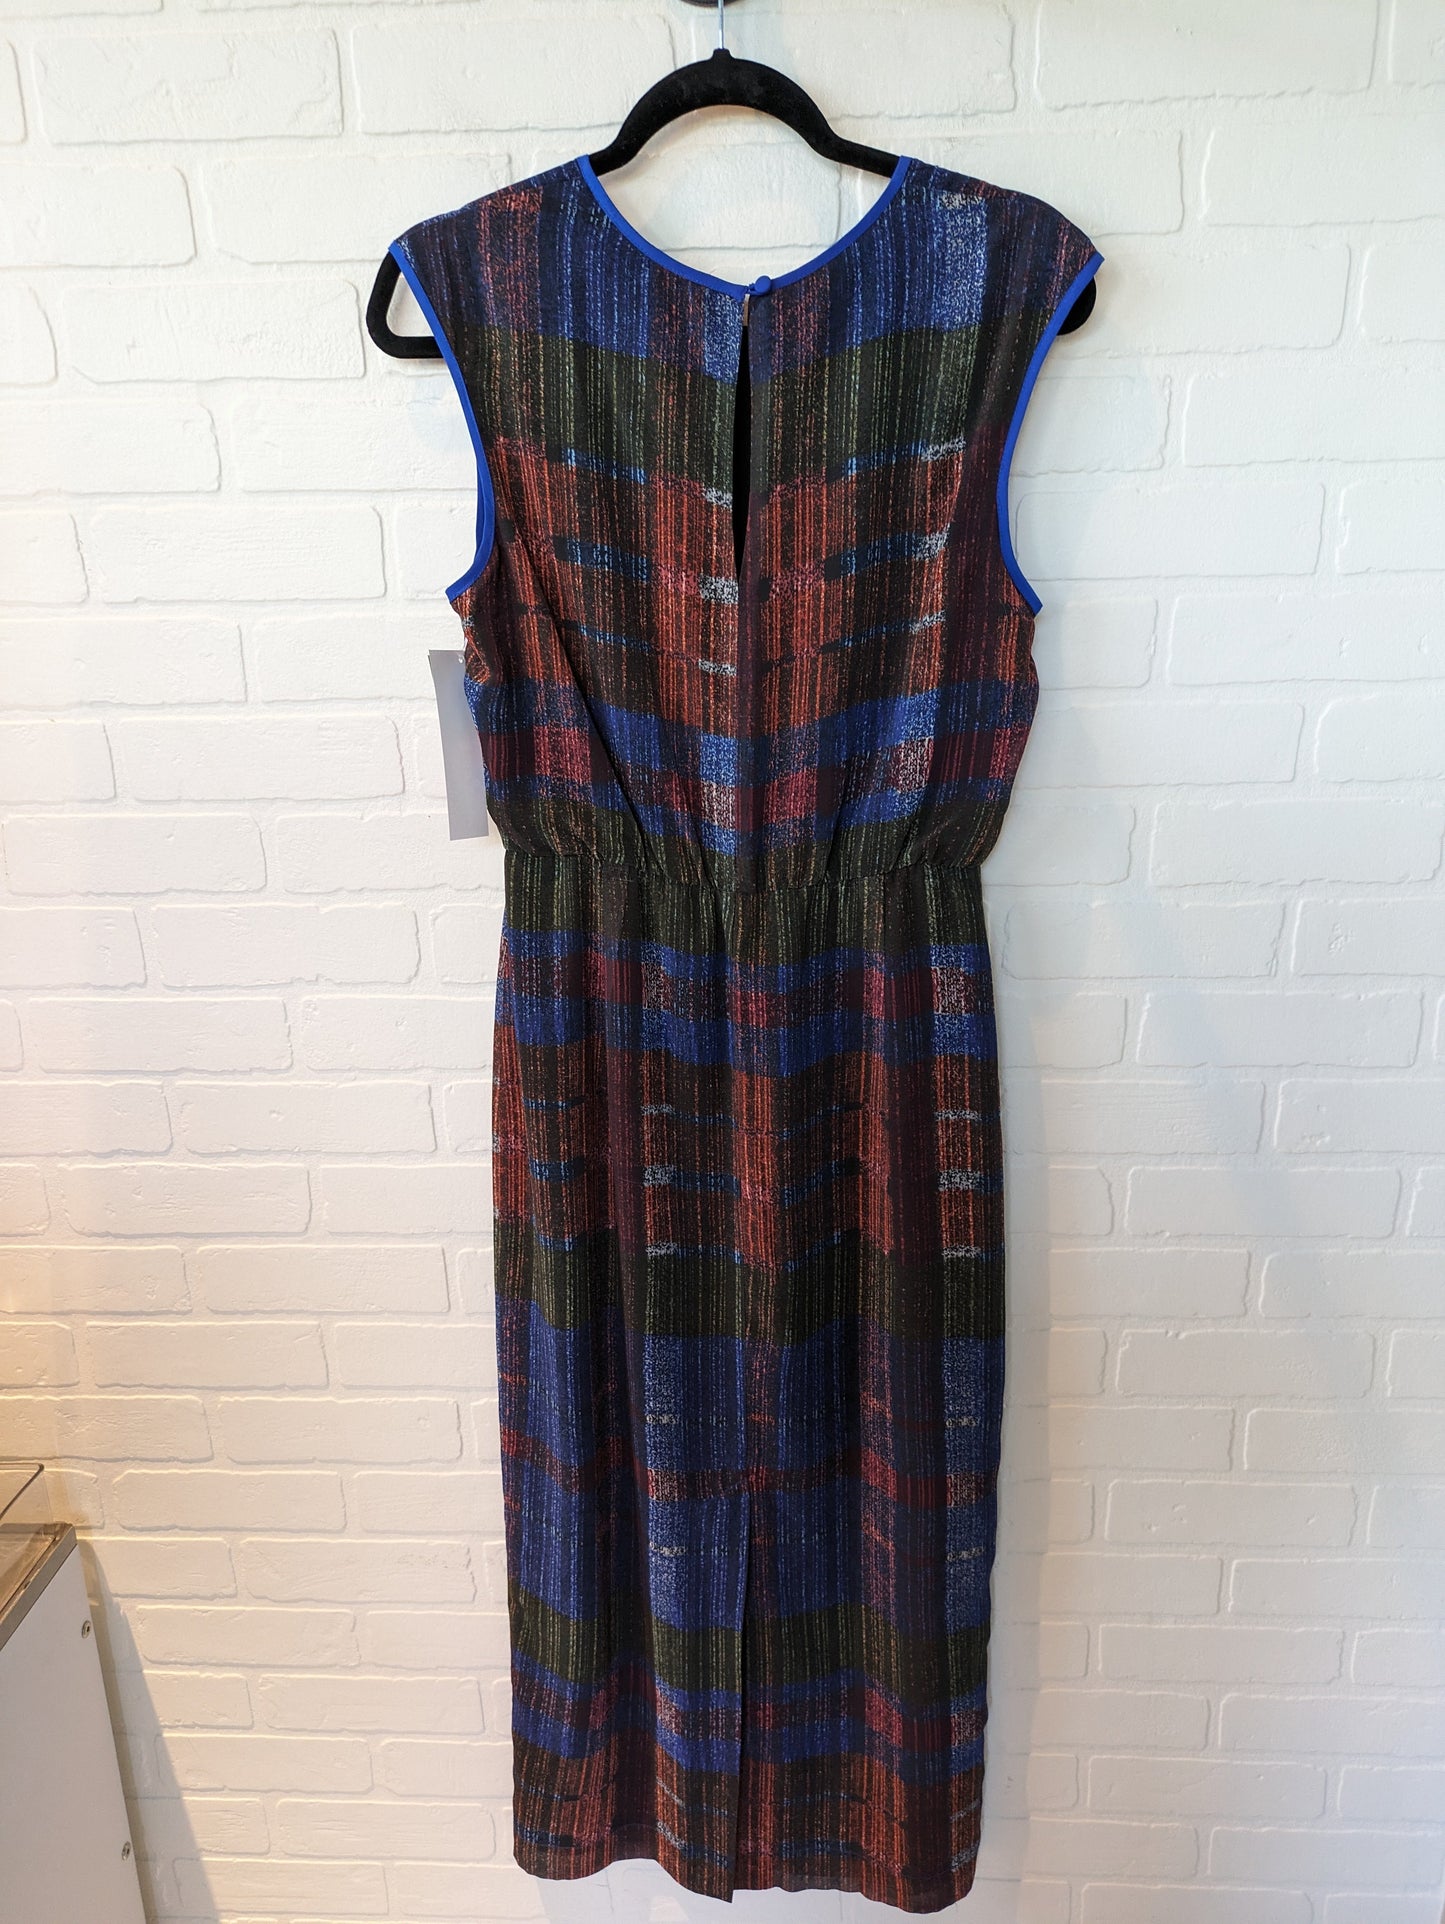 Dress Casual Maxi By Hd In Paris  Size: S